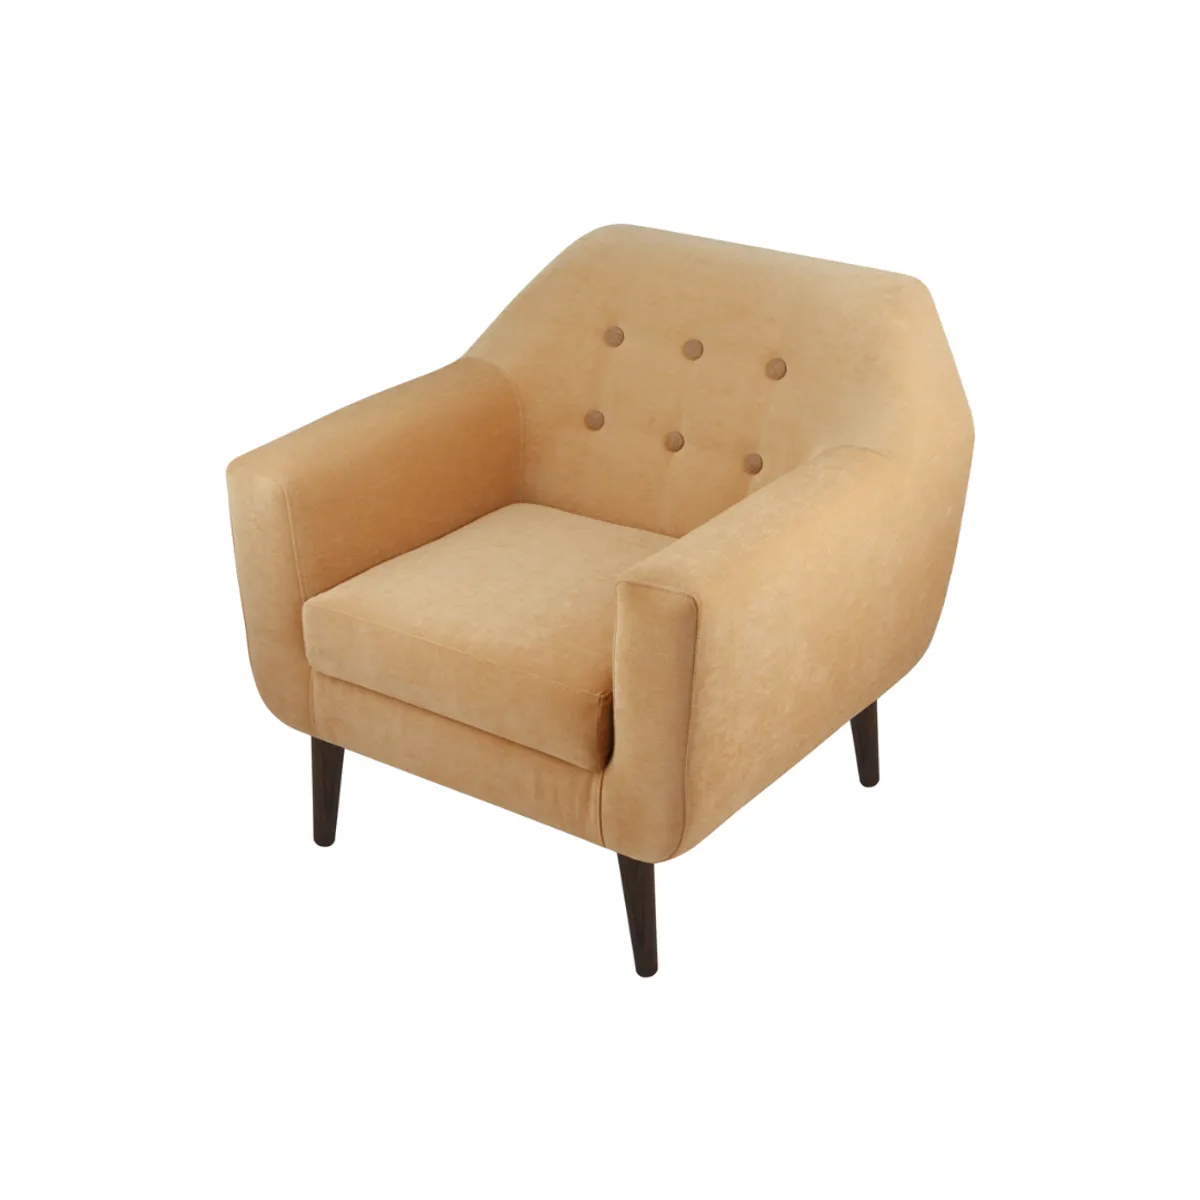 Garbo lounge chair 2